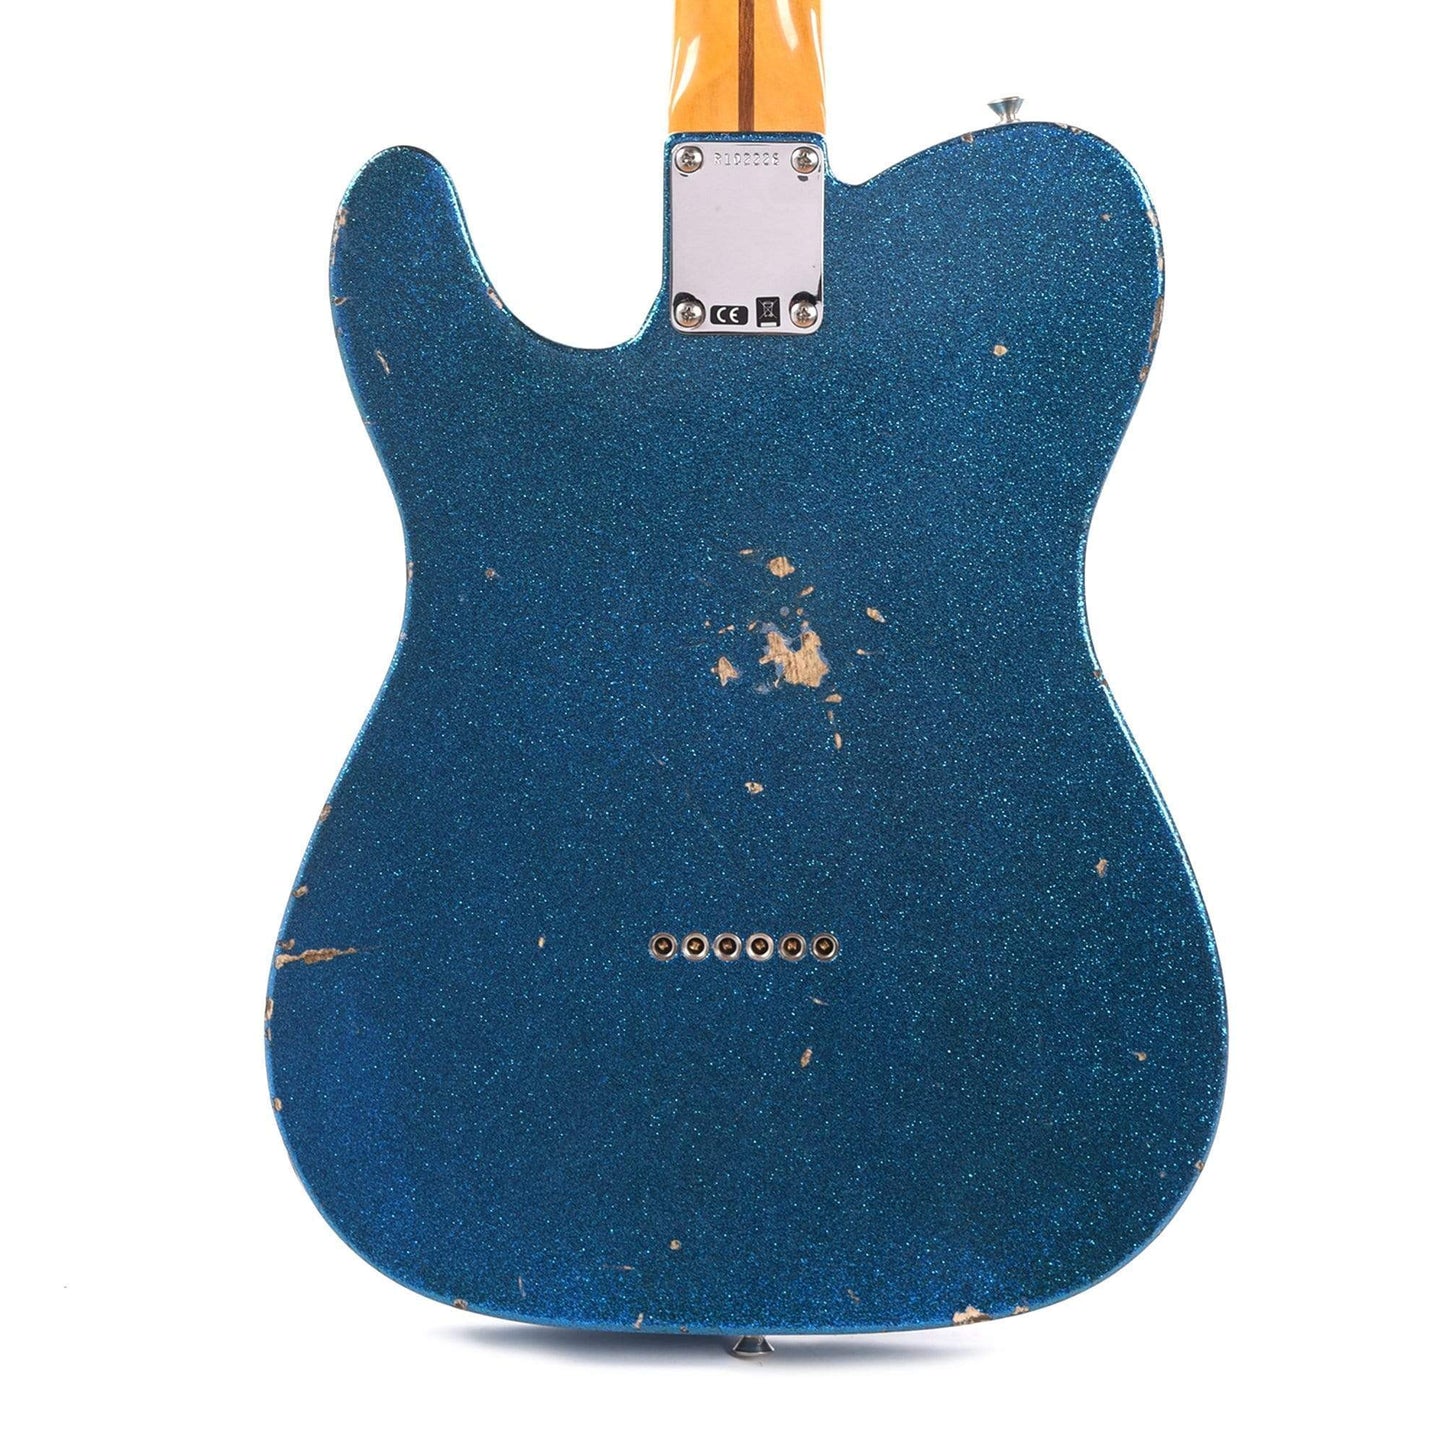 Fender Custom Shop 1955 Telecaster "Chicago Special" Relic Super Faded Aged Blue Sparkle Electric Guitars / Solid Body